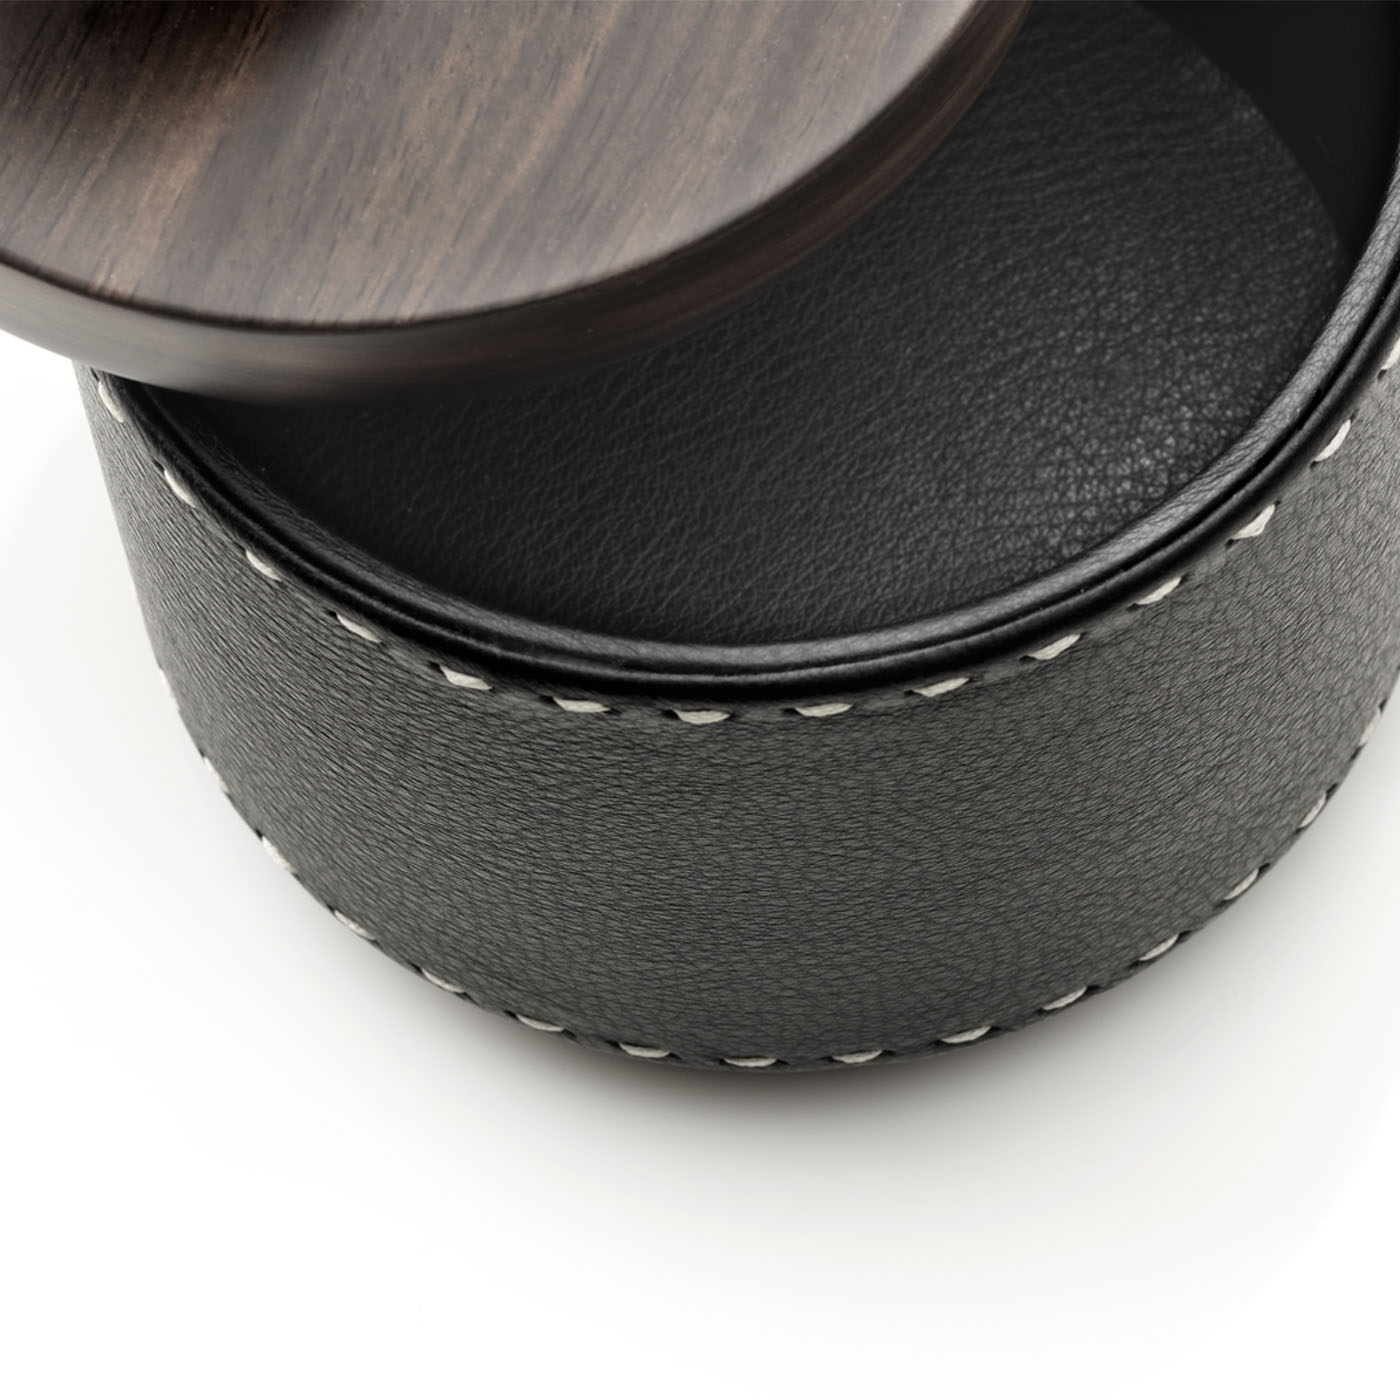 Picture frames and boxes - Agneta box in horn, leather and Amara ebony veneer mod. 4485 - detail - Arcahorn